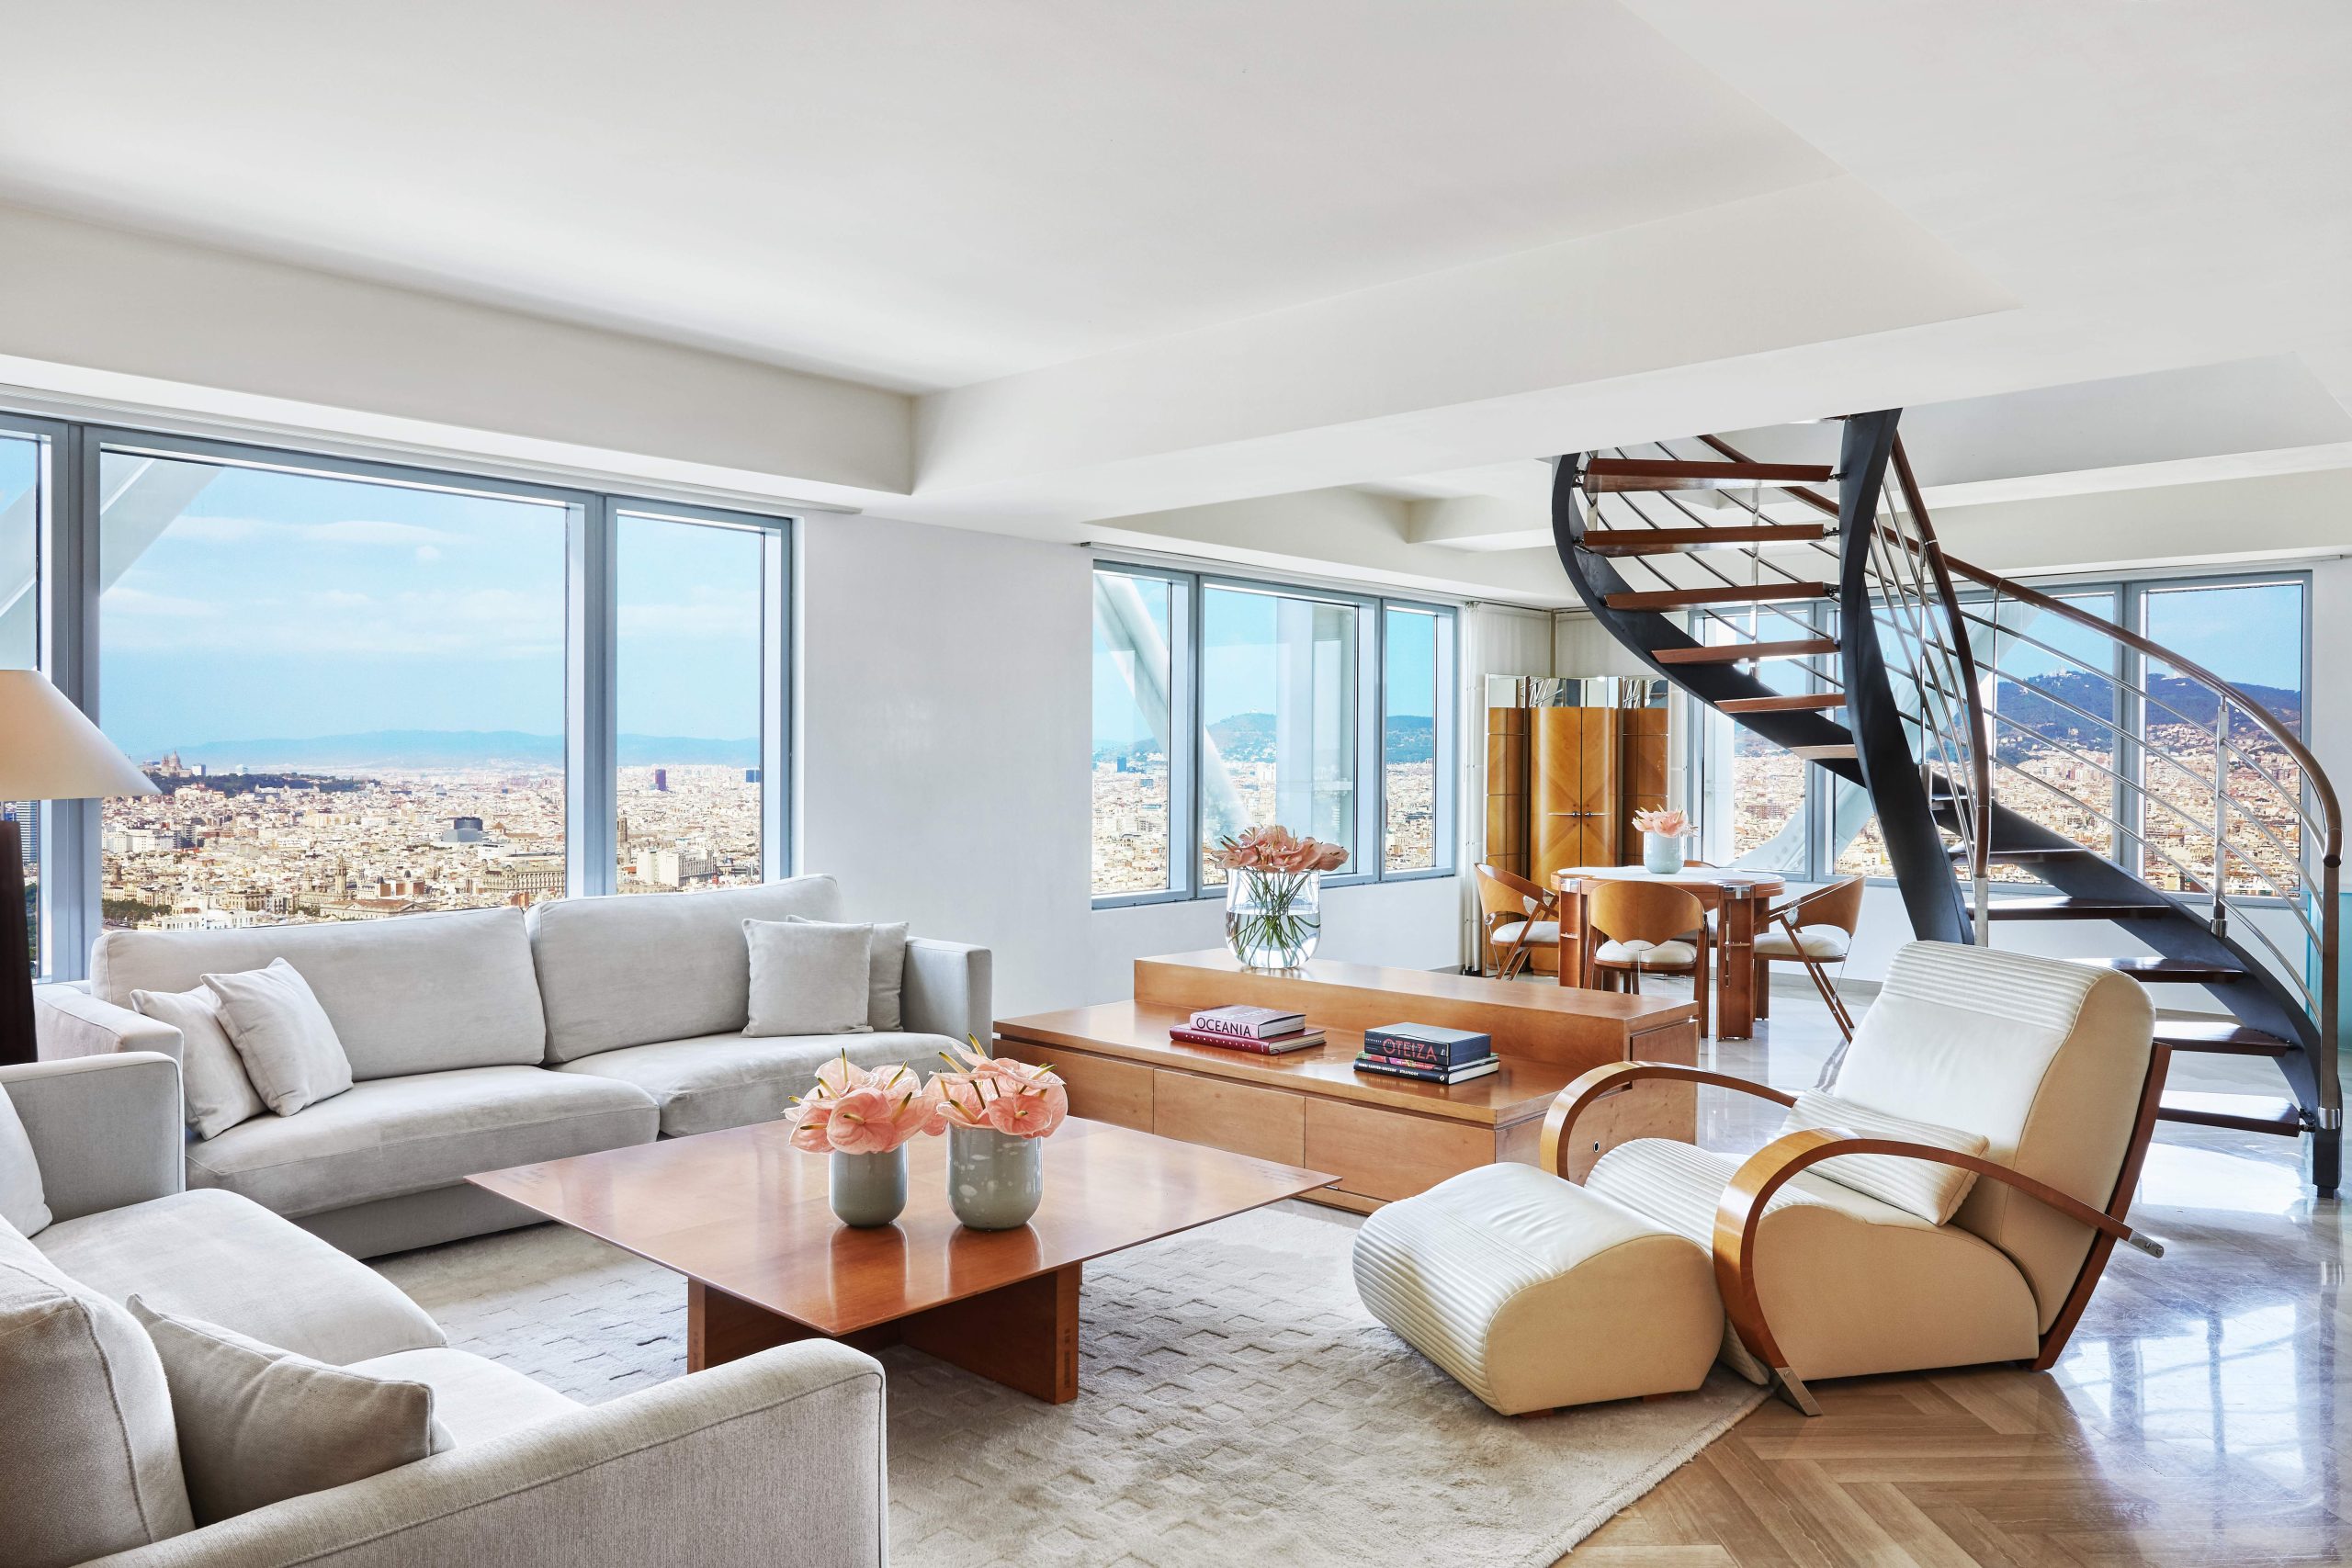 One of the city’s most popular and vibrant houses of slumber, Hotel Arts Barcelona balances luxury with contemporary hospitality and a spectacular location.